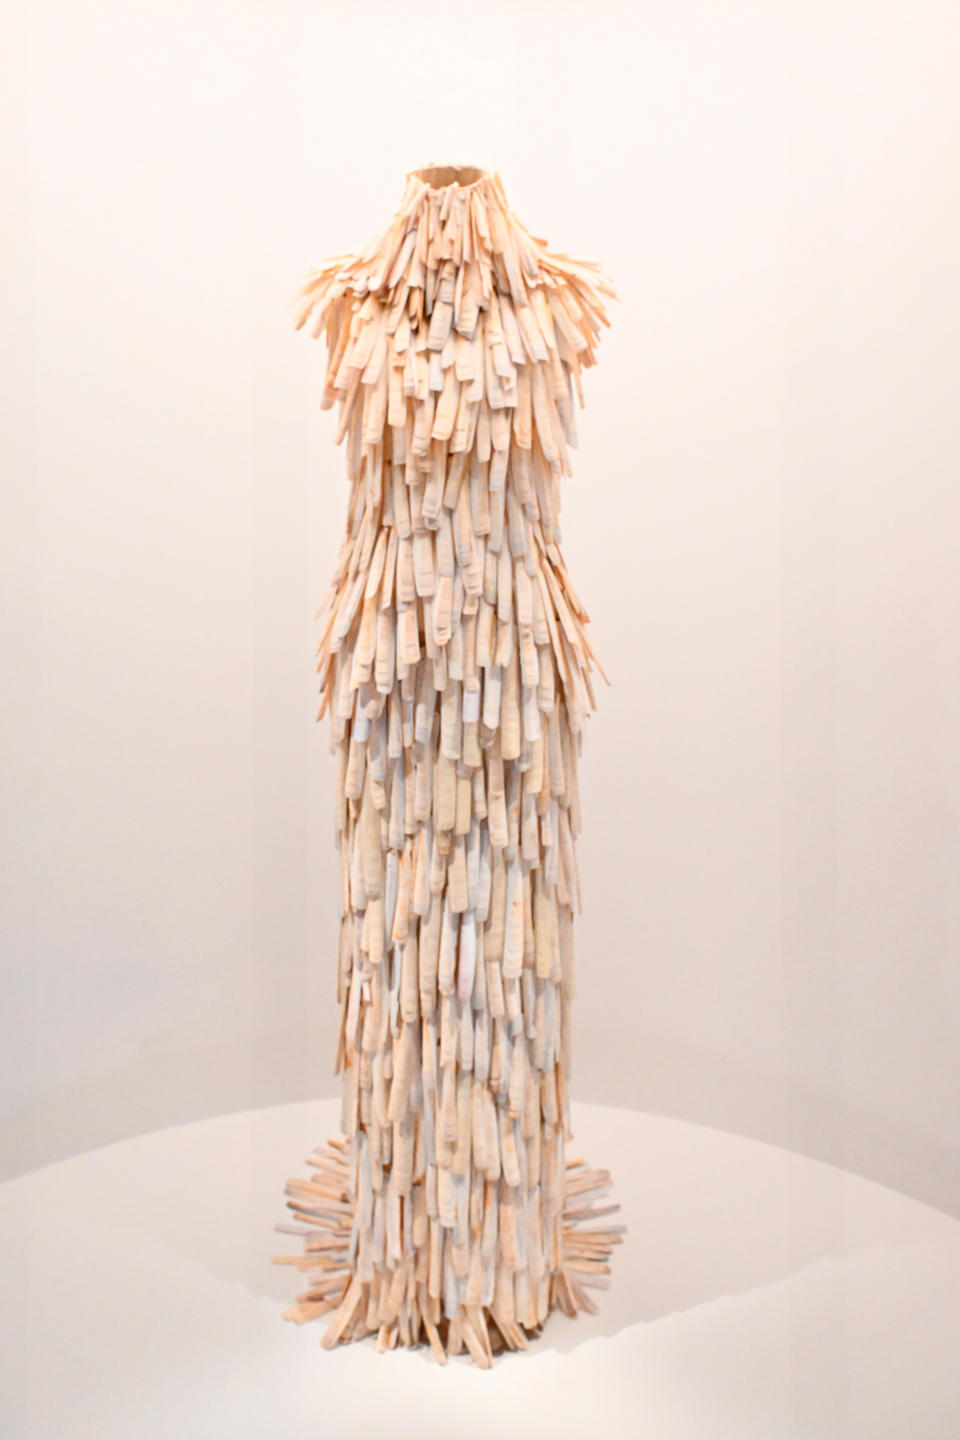 Sculptural dress made of layered material on a mannequin, displayed in a gallery setting